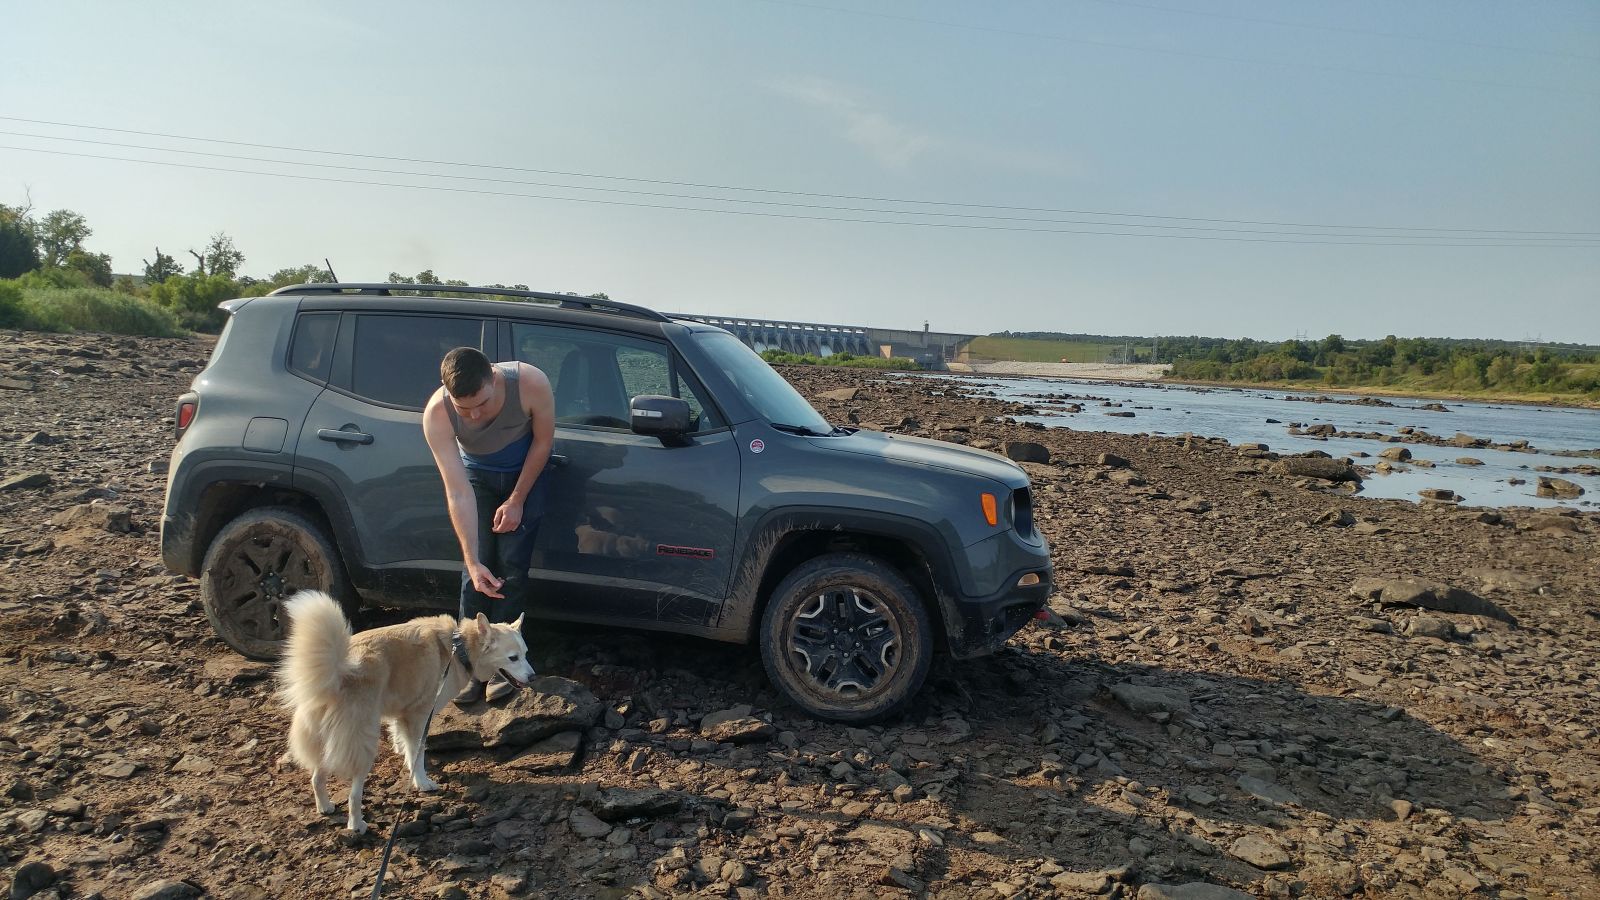 Dog A and George on his last off-roading adventure. Not pictured: Wagovan